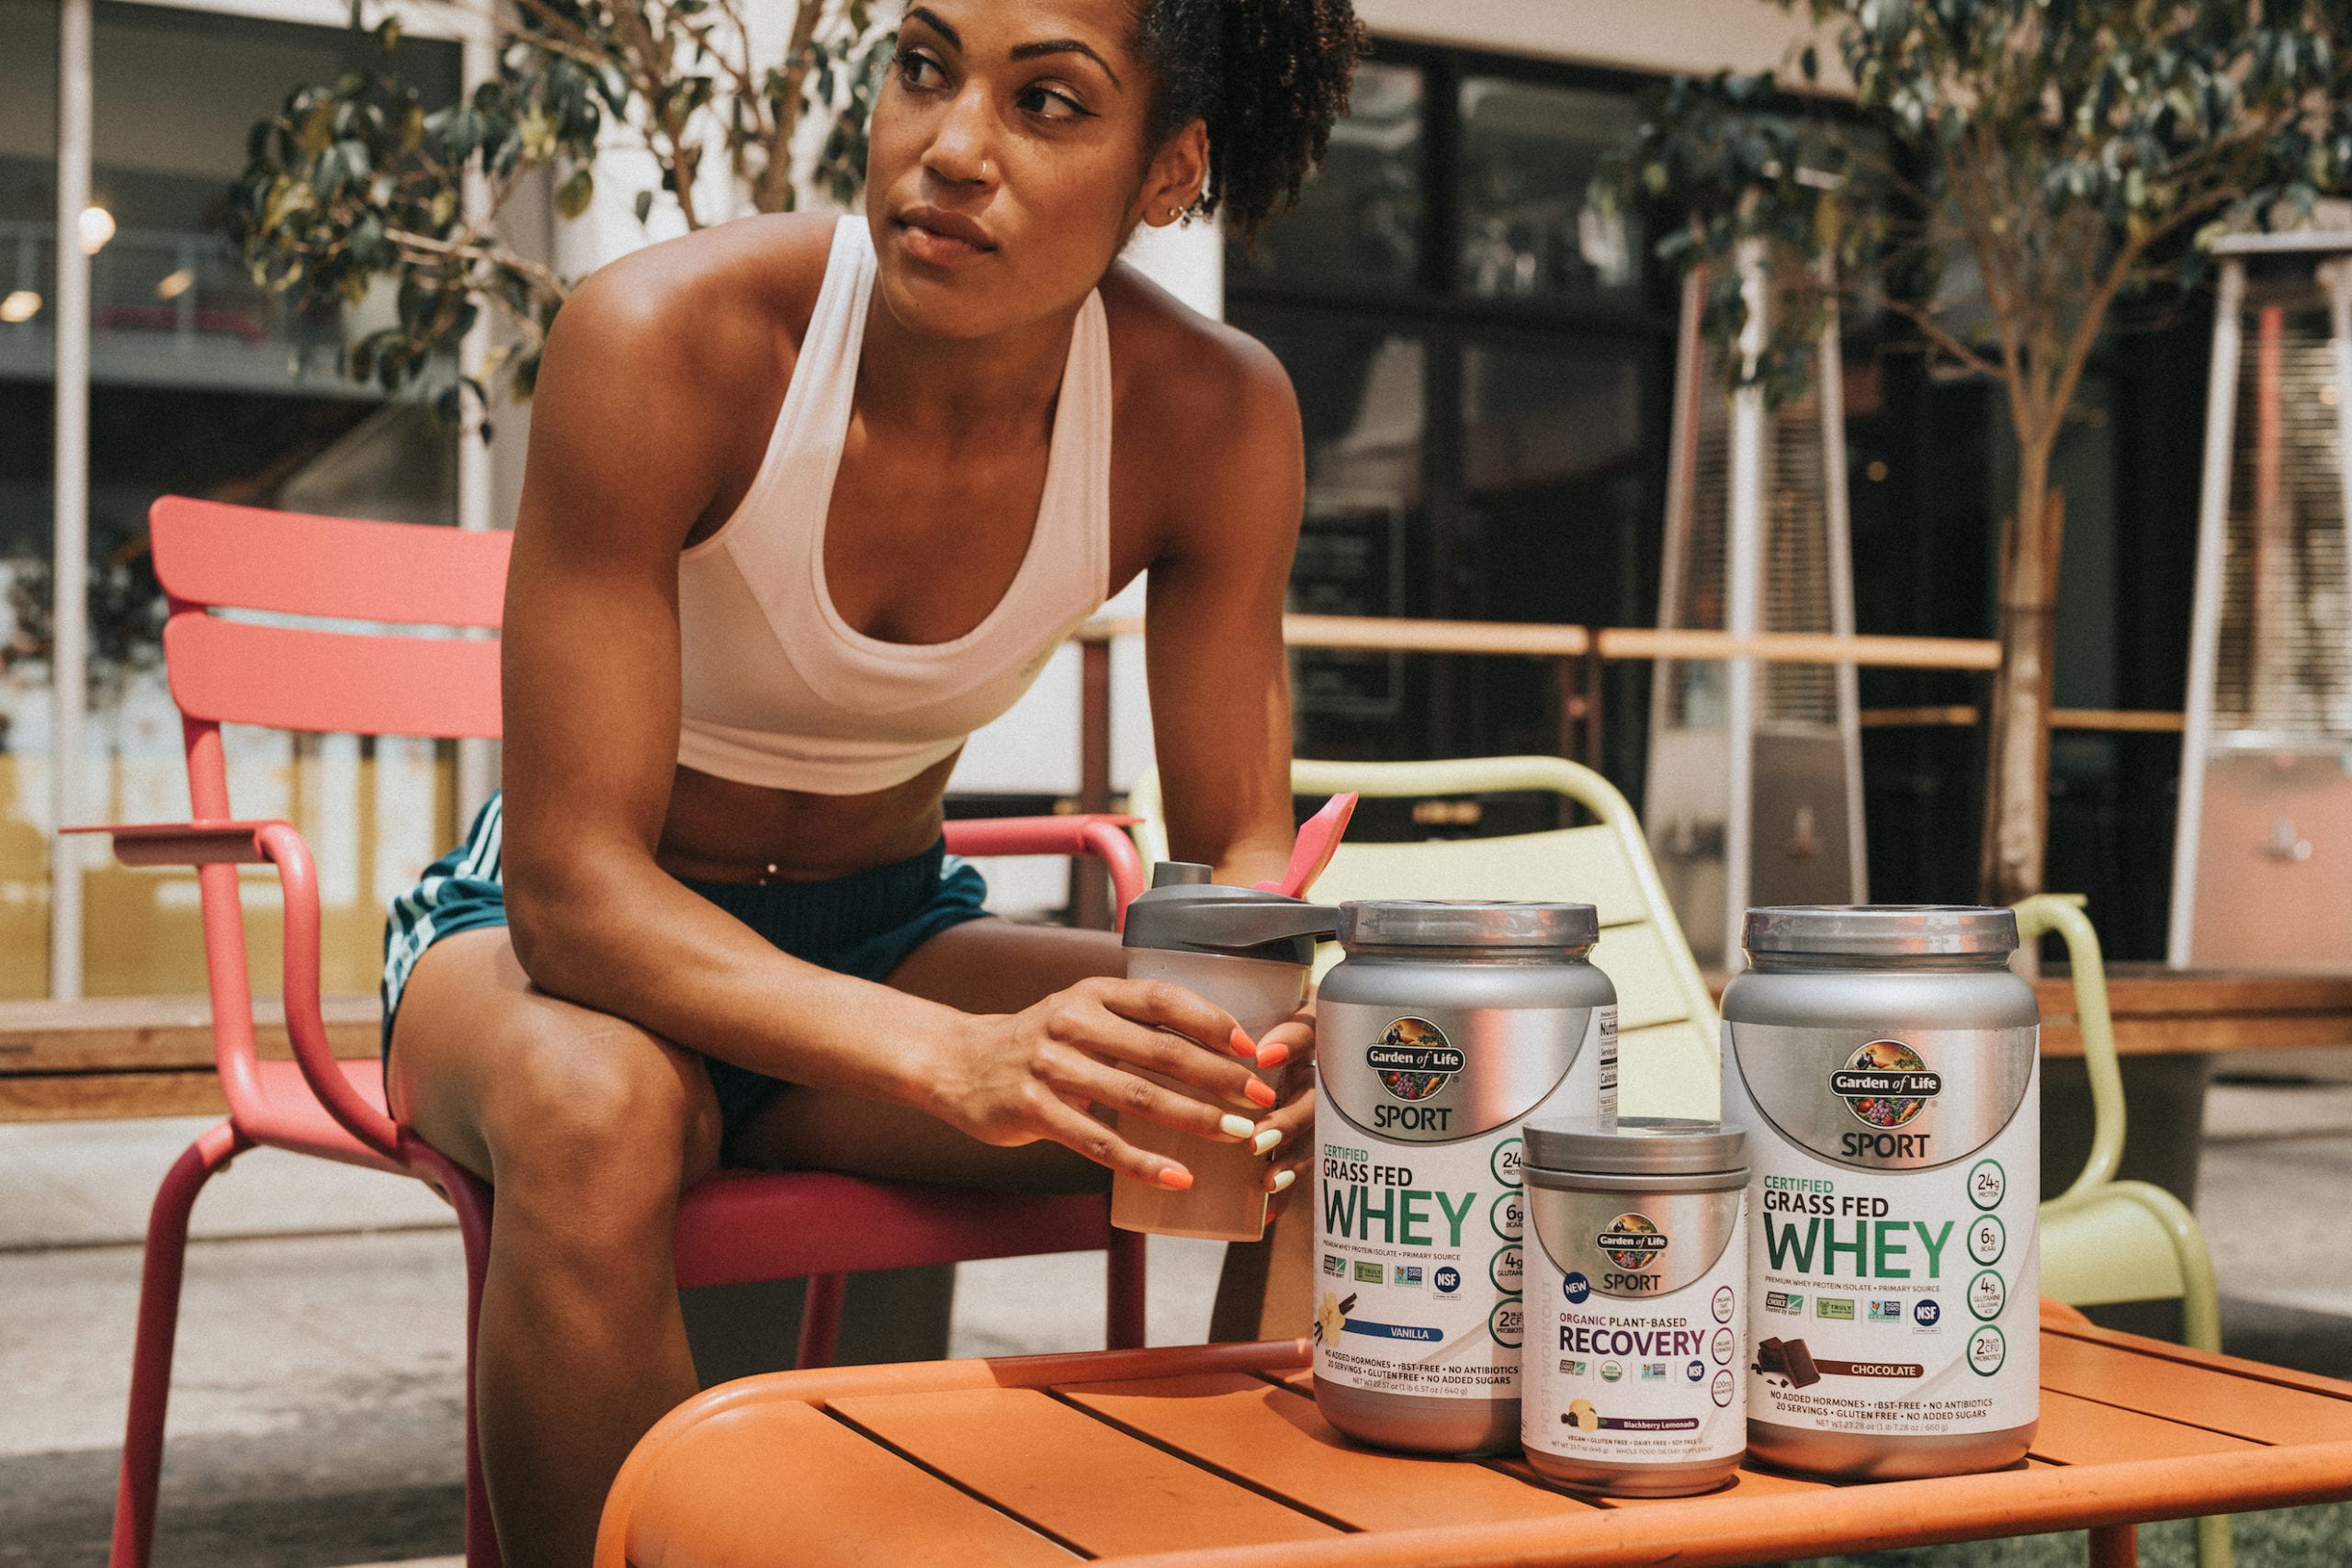 Karelle Edwards sitting on a pink chair looking off camera by an orange table with Garden of Life Whey and plant based recovery powders